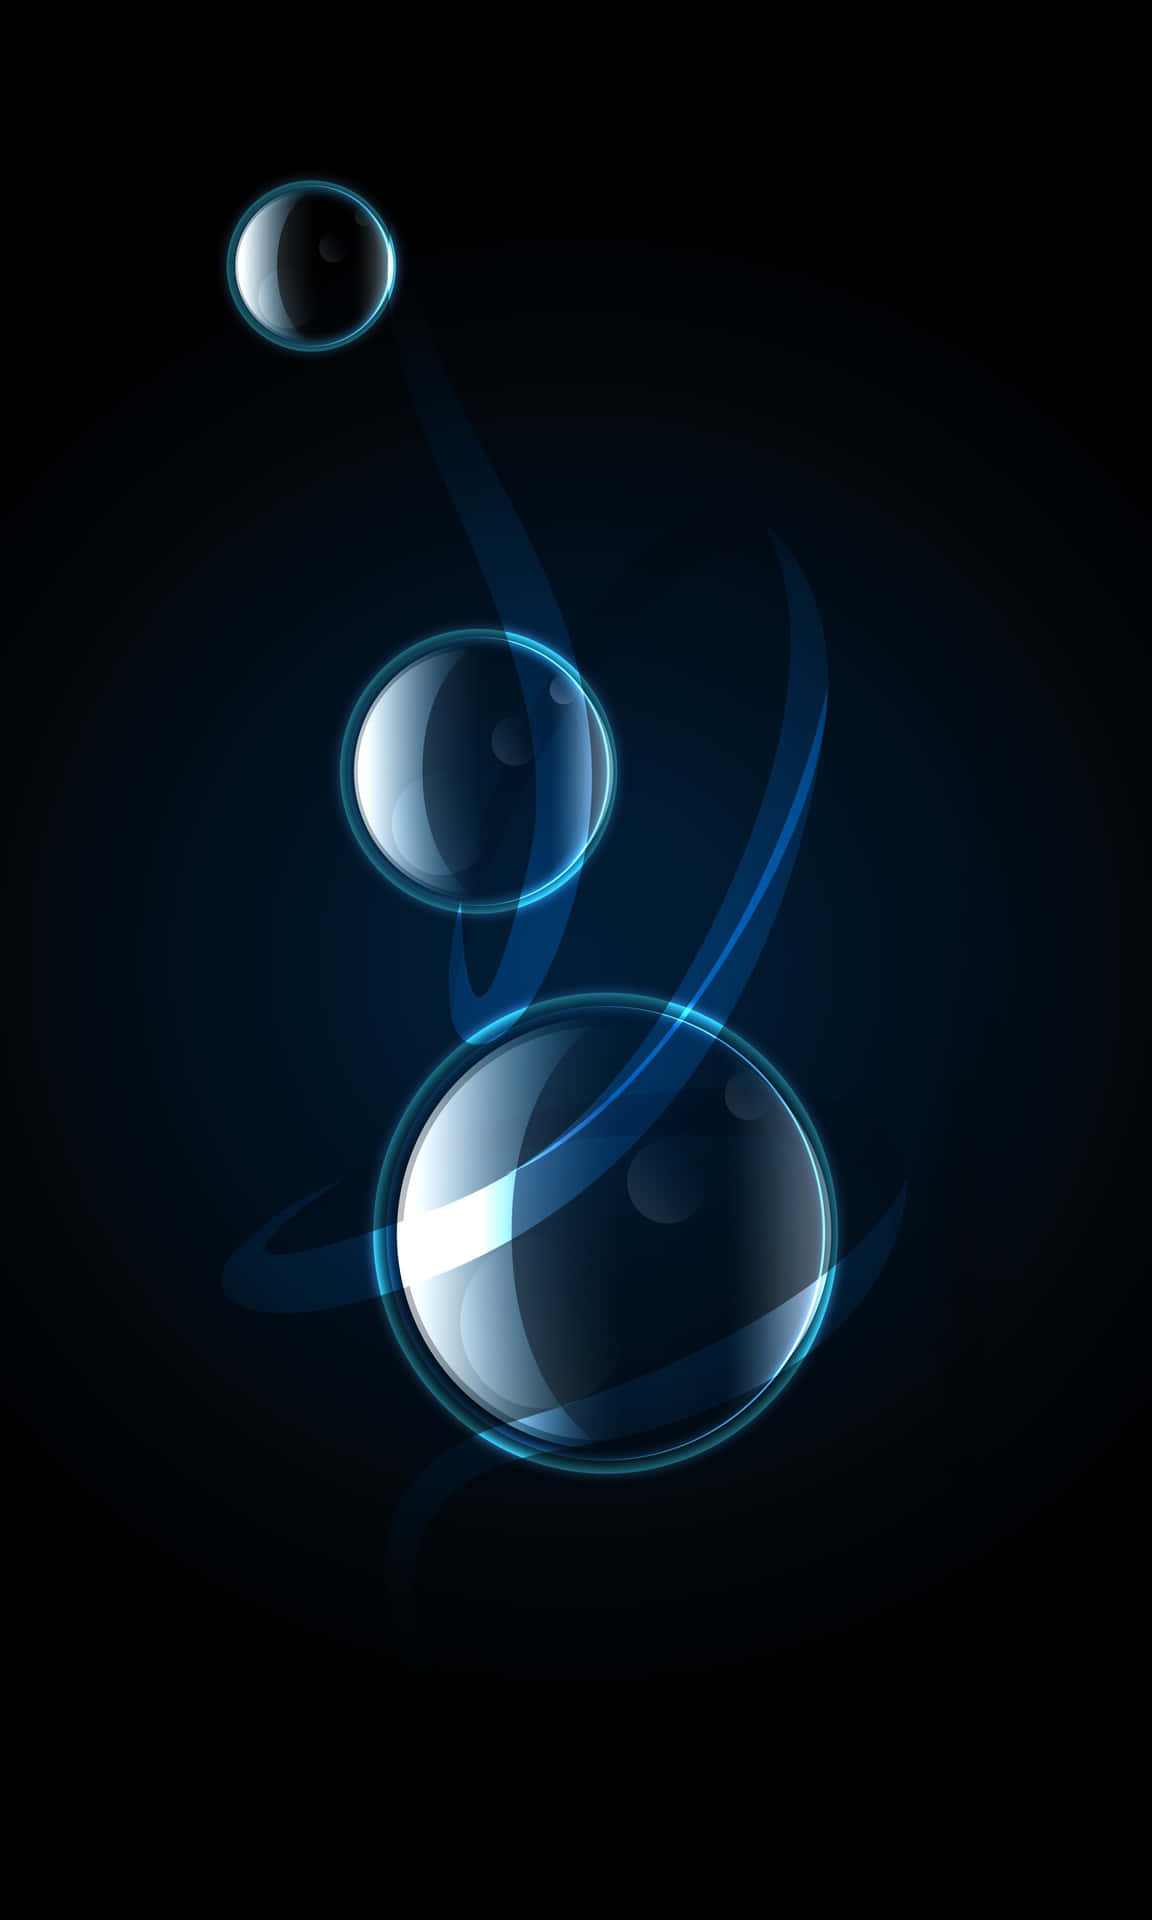 Abstract Blue Circleson Dark Background Wallpaper